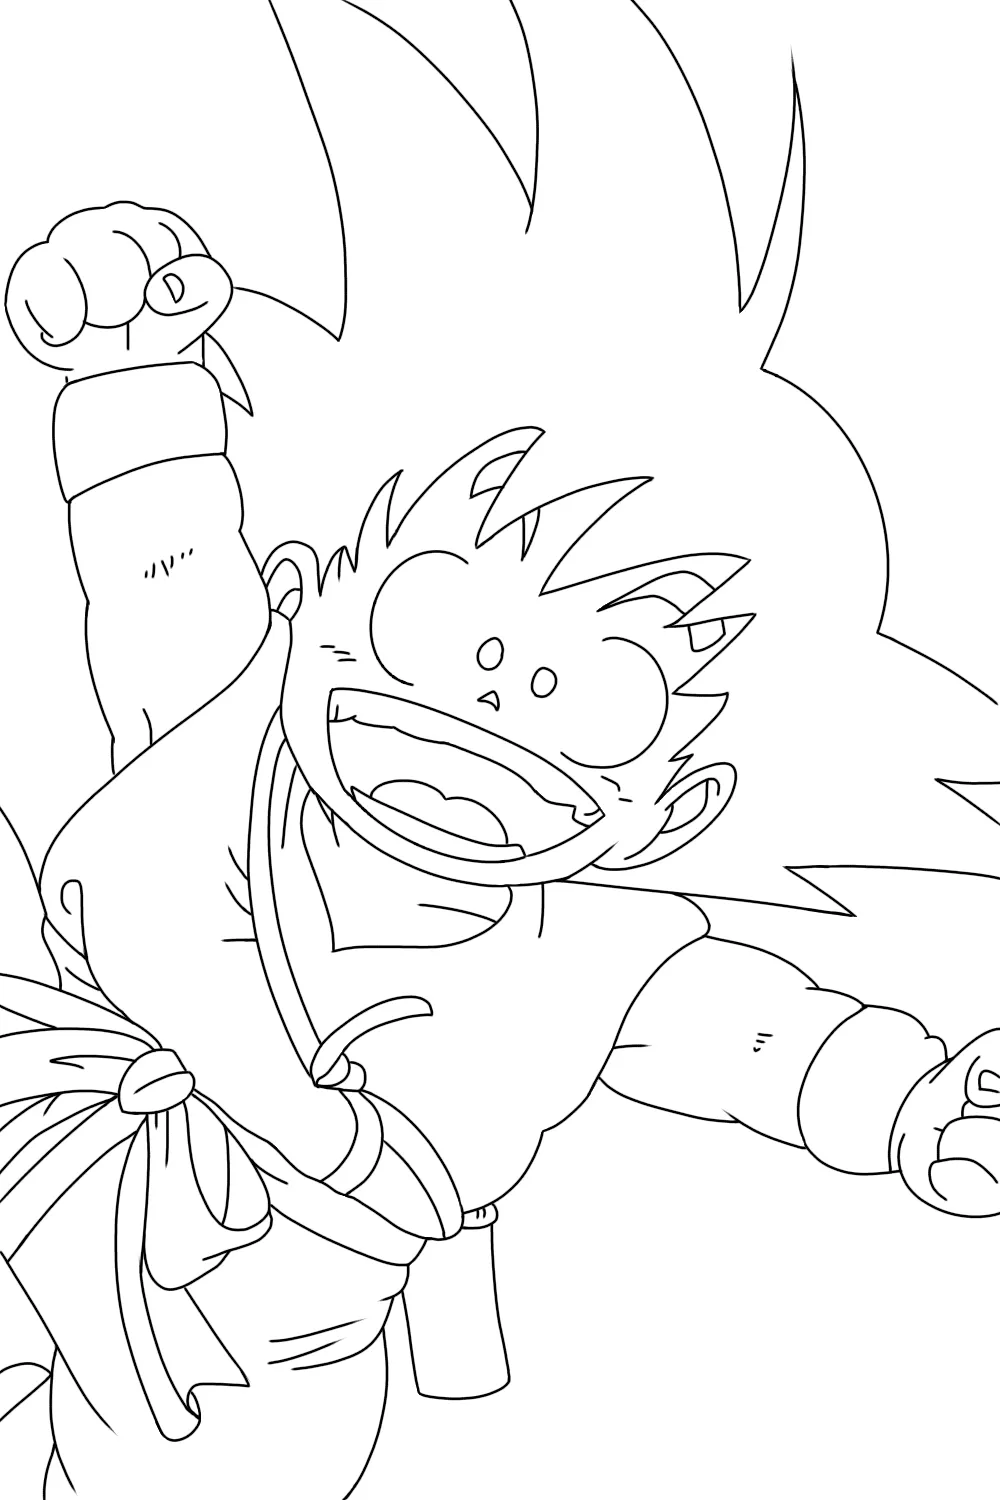 Dragon Ball Coloring Pages for Kids